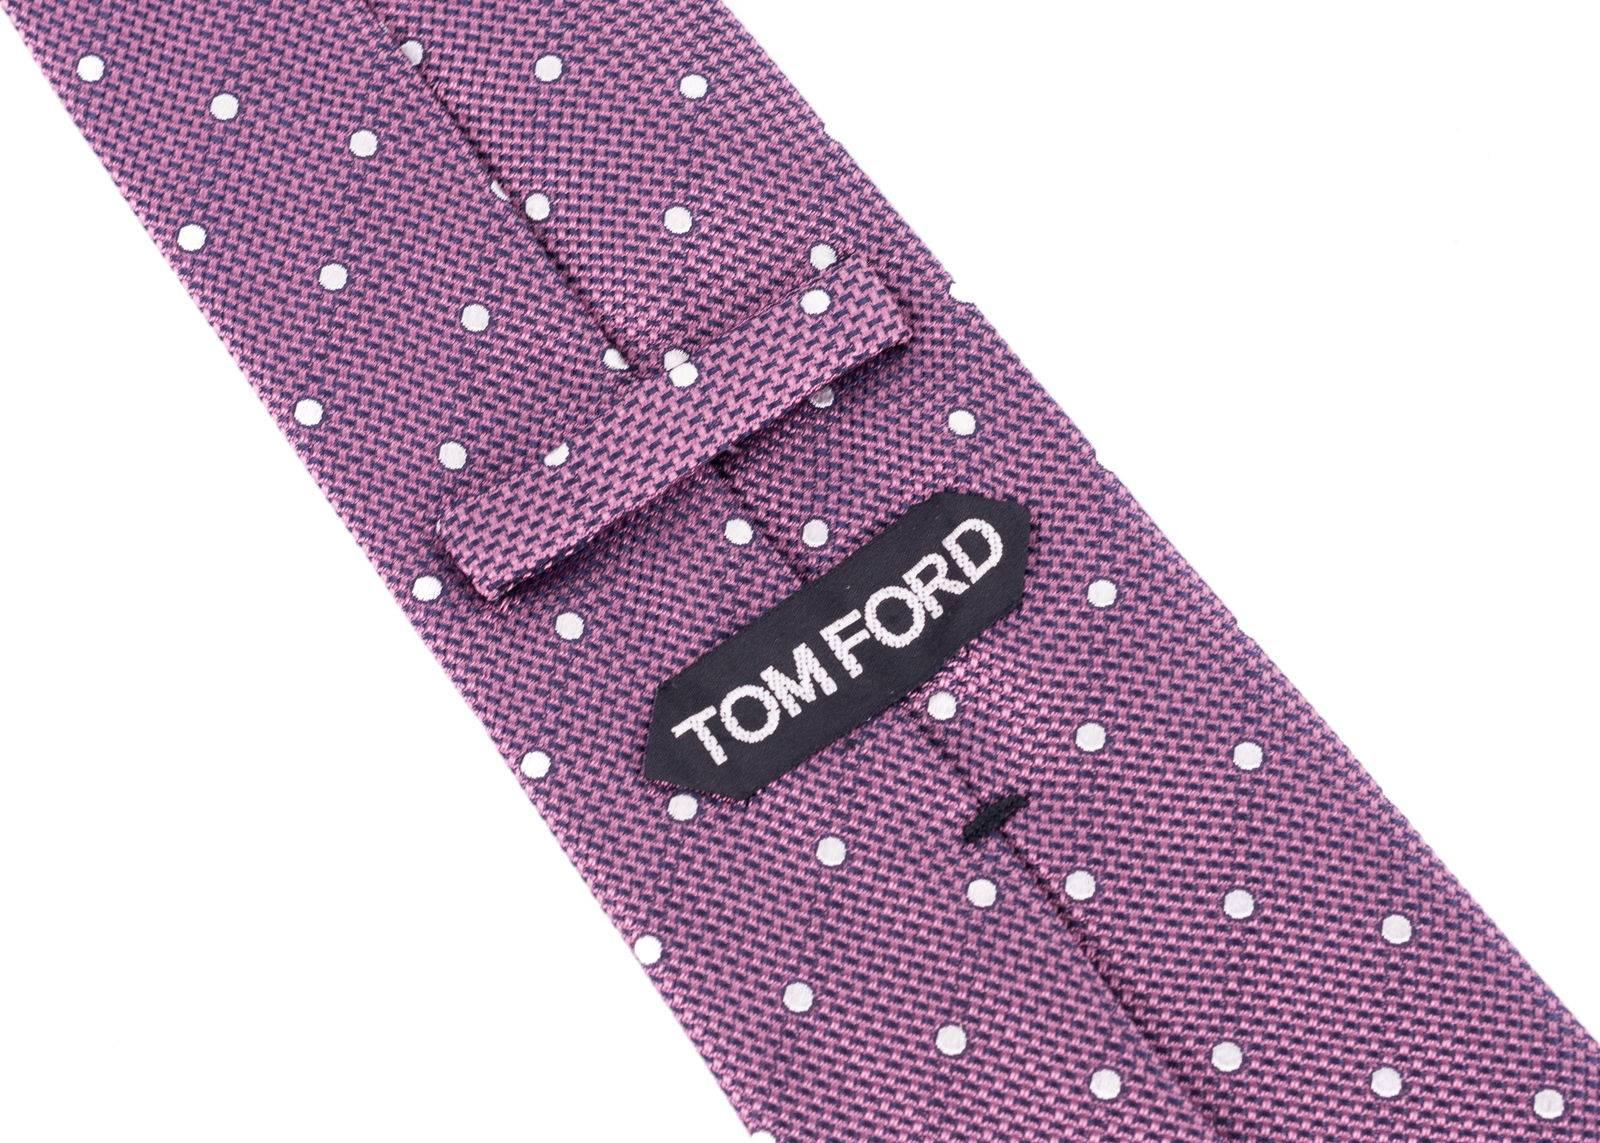 talian luxury brand, Tom Ford, has crafted these gorgeous Silk Tie for important special occasions and professional events. The tie is great to pair with your favorite solid color button down and blazers with your chosen pair or classic trousers.